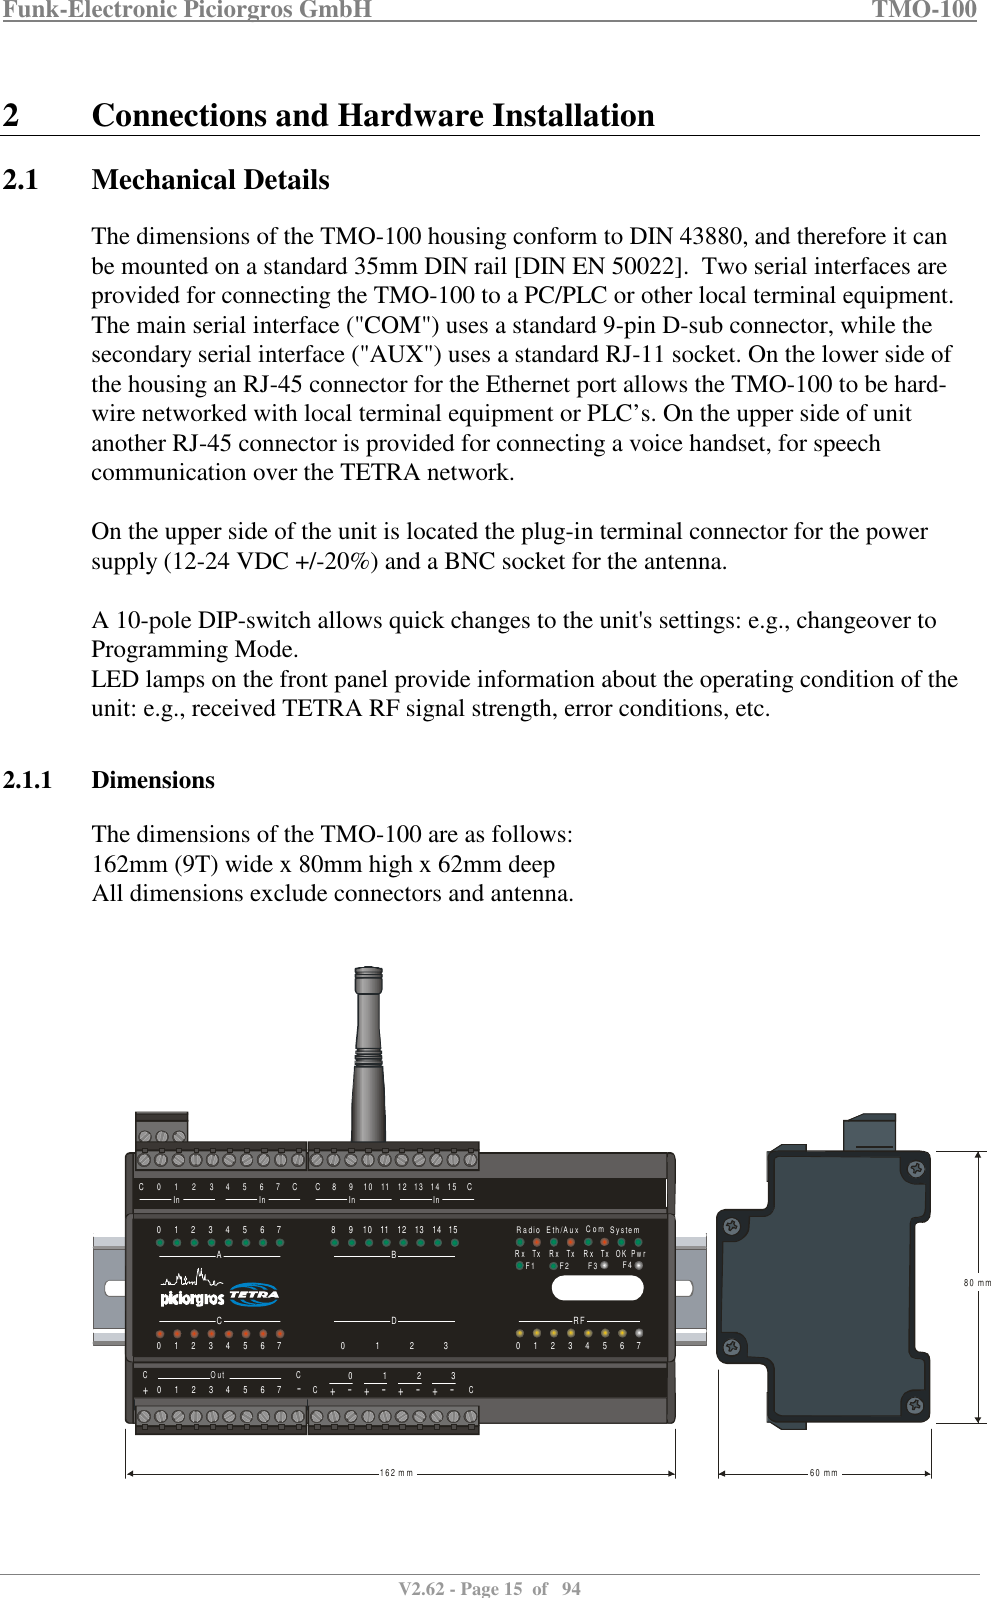 Funk-Electronic Piciorgros GmbH   TMO-100   V2.62 - Page 15  of   94   2 Connections and Hardware Installation 2.1 Mechanical Details The dimensions of the TMO-100 housing conform to DIN 43880, and therefore it can be mounted on a standard 35mm DIN rail [DIN EN 50022].  Two serial interfaces are provided for connecting the TMO-100 to a PC/PLC or other local terminal equipment. The main serial interface (&quot;COM&quot;) uses a standard 9-pin D-sub connector, while the secondary serial interface (&quot;AUX&quot;) uses a standard RJ-11 socket. On the lower side of the housing an RJ-45 connector for the Ethernet port allows the TMO-100 to be hard-wire networked with local terminal equipment or PLC’s. On the upper side of unit another RJ-45 connector is provided for connecting a voice handset, for speech communication over the TETRA network.   On the upper side of the unit is located the plug-in terminal connector for the power supply (12-24 VDC +/-20%) and a BNC socket for the antenna.   A 10-pole DIP-switch allows quick changes to the unit&apos;s settings: e.g., changeover to Programming Mode.  LED lamps on the front panel provide information about the operating condition of the unit: e.g., received TETRA RF signal strength, error conditions, etc.  2.1.1 Dimensions The dimensions of the TMO-100 are as follows: 162mm (9T) wide x 80mm high x 62mm deep All dimensions exclude connectors and antenna.      R FBDAC080 1 2 300 1911 21022 31133 41244 51355 61466 71577CCO u t CC++ + + +-- - - -0 1 2 30 1 2 3 4 5 6 7C C0 81 92 1 03 114 1 251 36 1 4In InIn In7 1 5C C8 0  m m6 0  m m1 6 2  m mR a d i oR x R x R xT x T x T x O K P w rE t h /A u x S y s t e mC o mF 1 F 2 F 4F 3